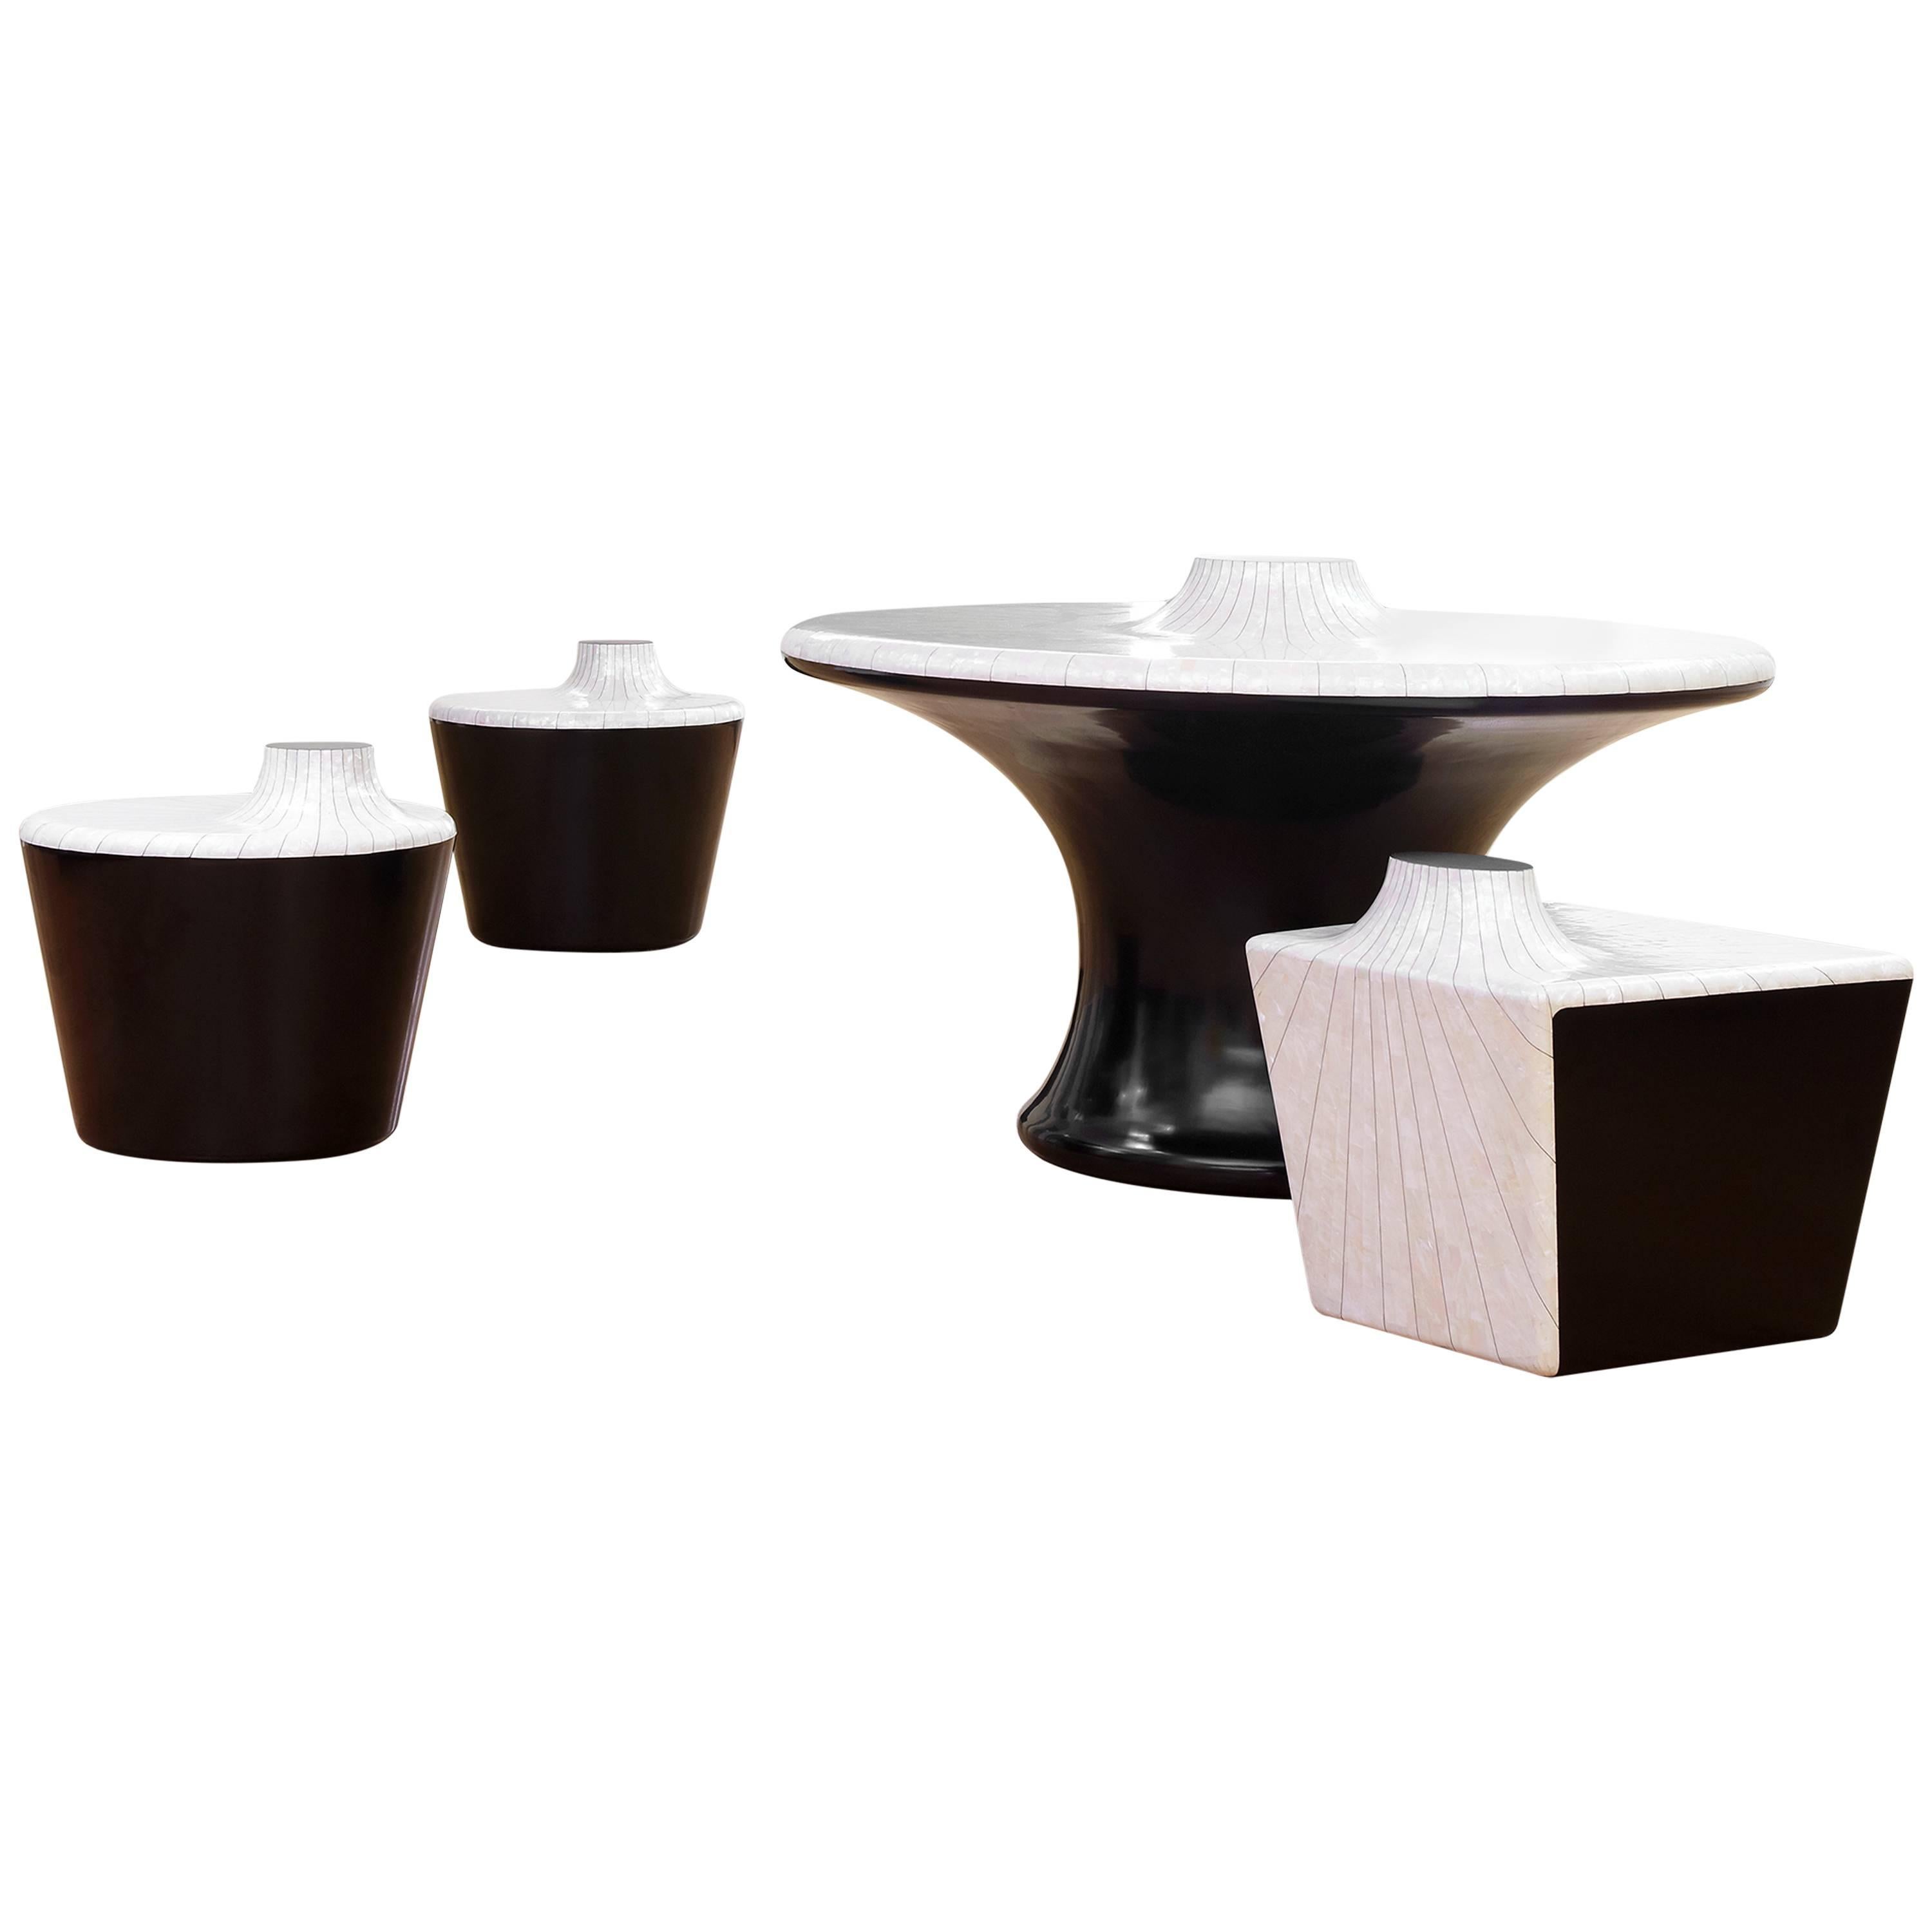 Mother of Pearl dining set by Kang Myung Sun, 2010 For Sale